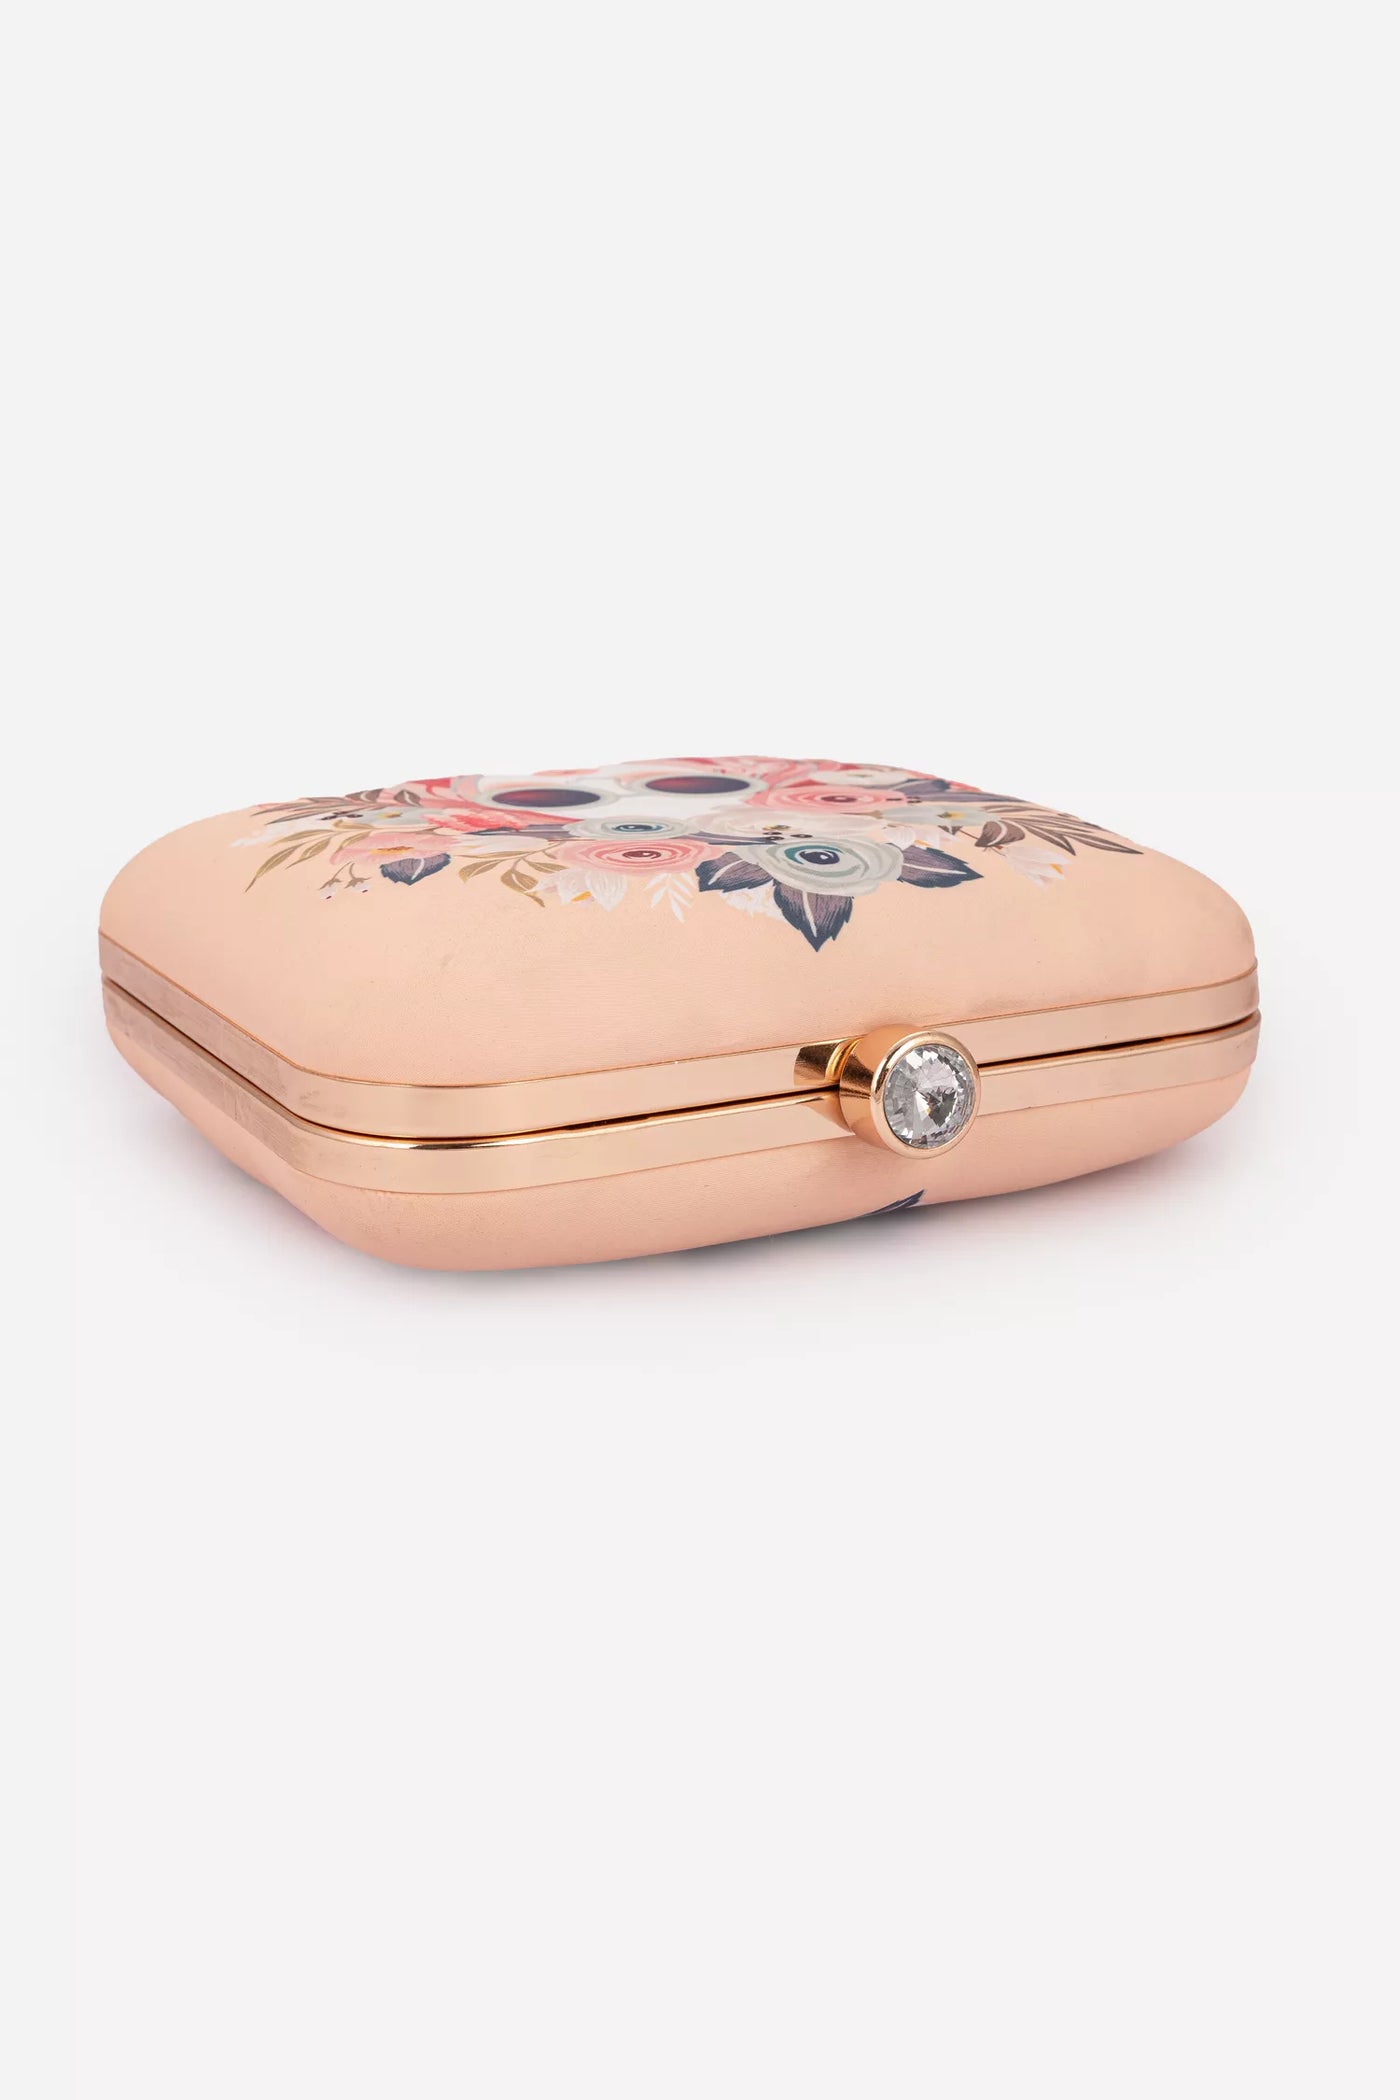 Nude Pink With Multicolored Print Clutch